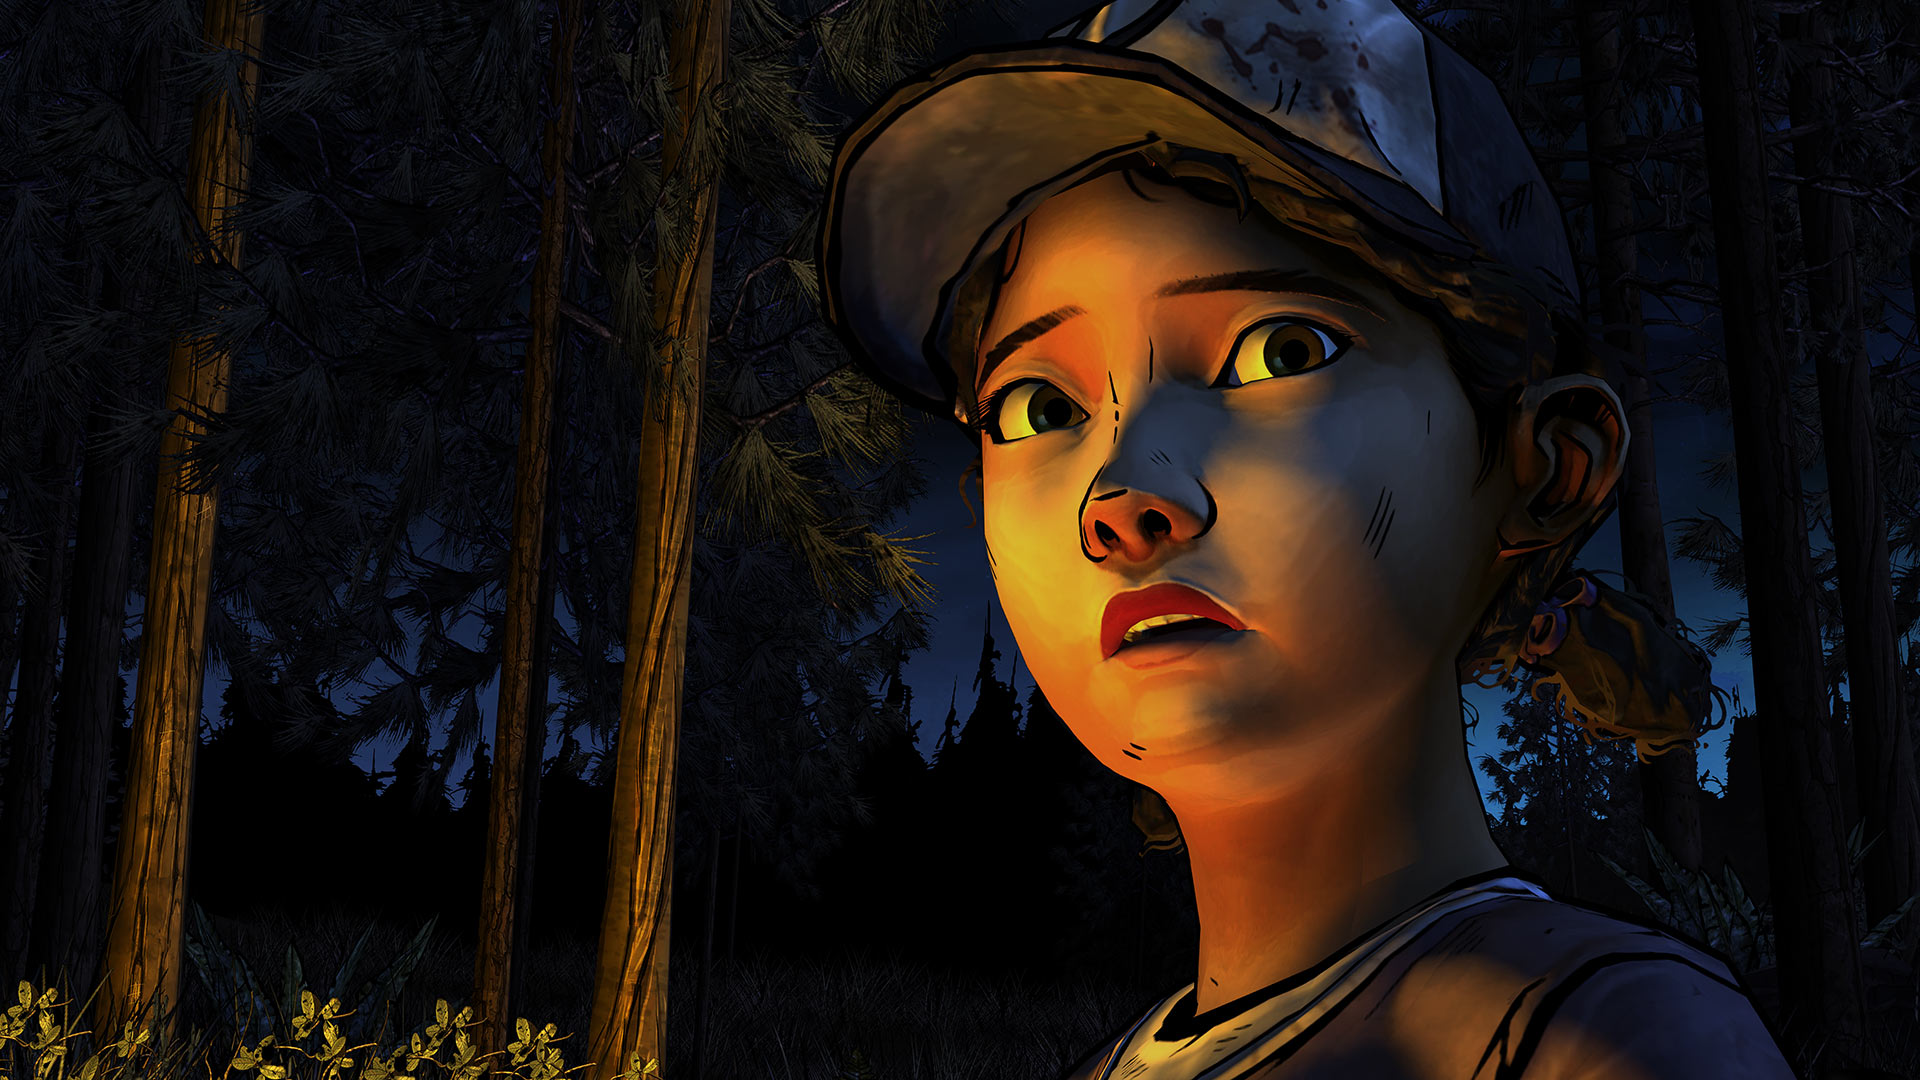 The Sequel To 2012’s Amazing Walking Dead Game Is Here. It’s Depressing.